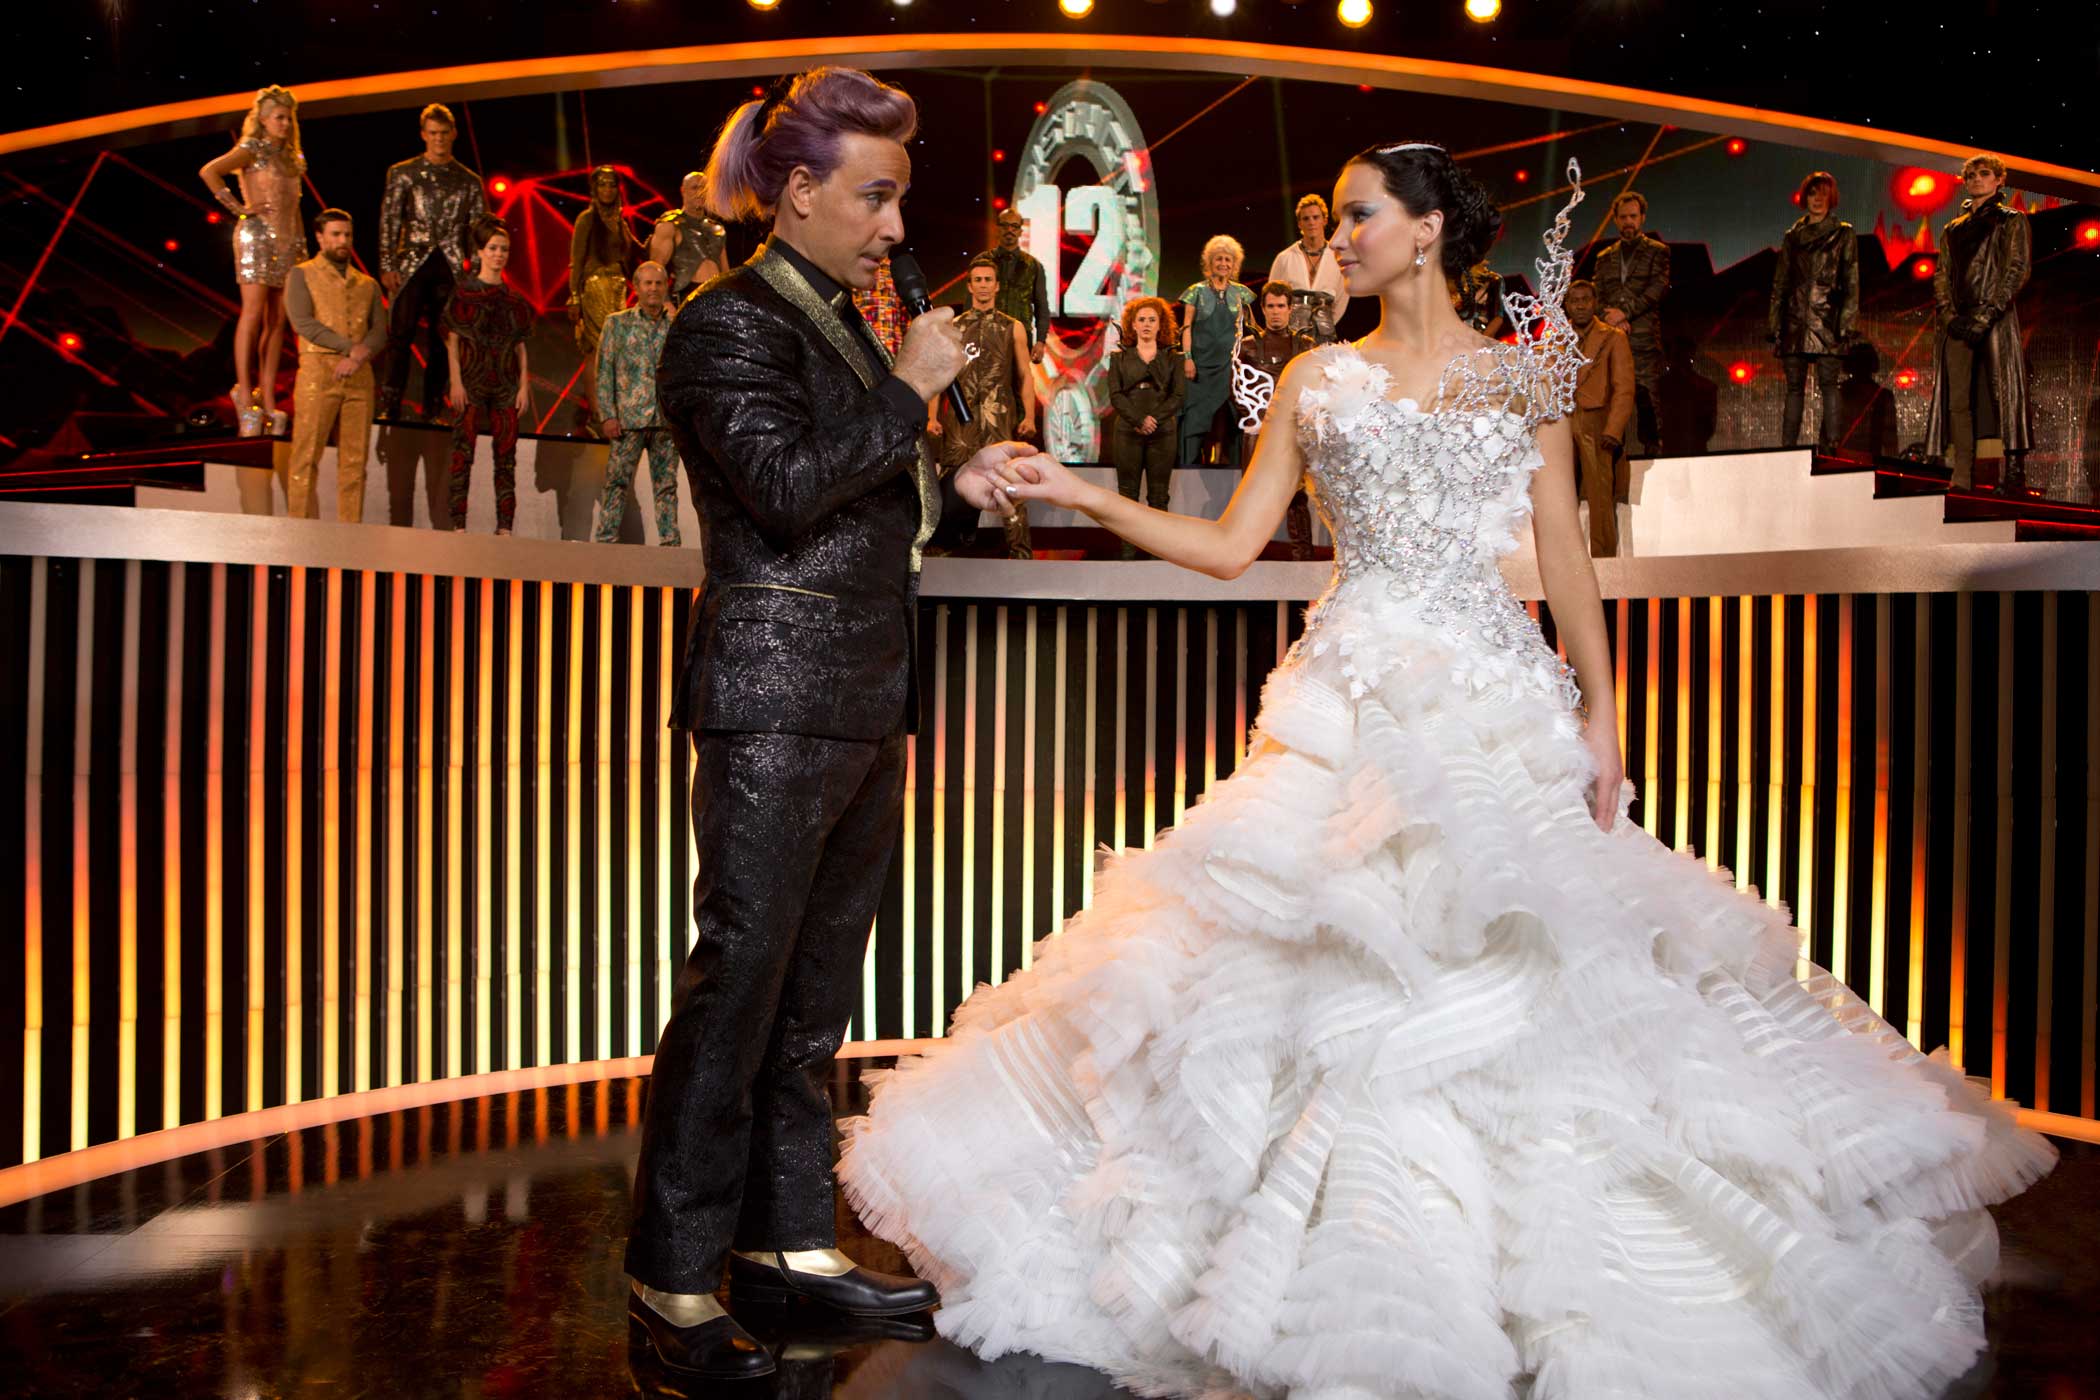 Stanley Tucci as Caesar Flickerman and Jennifer Lawrence as Katniss Everdeen in The Hunger Games: Catching Fire, 2013.